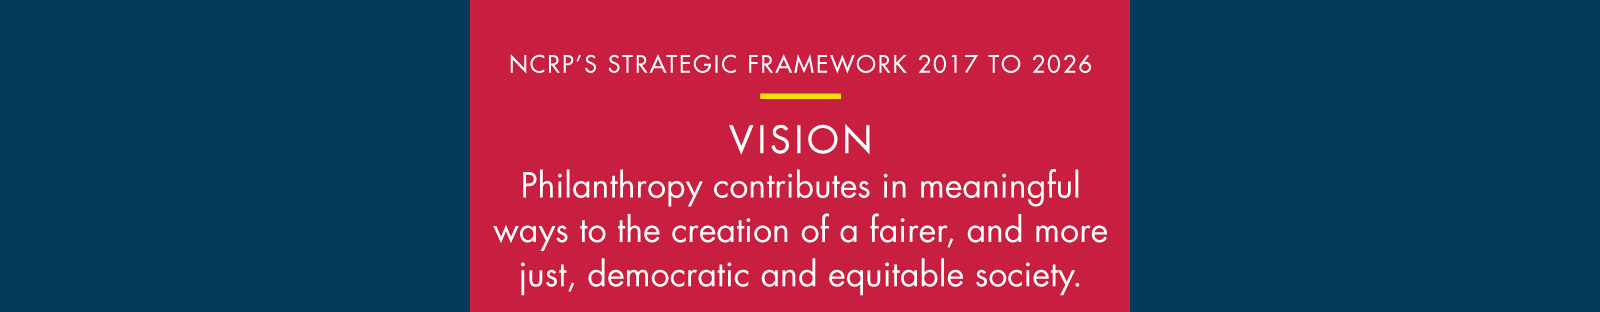 This logic model shows NCRP’s strategic framework for 2017-2026, which is guided by the vision that philanthropy contributes in meaningful ways to the creation of a fairer, and more just, democratic and equitable society.